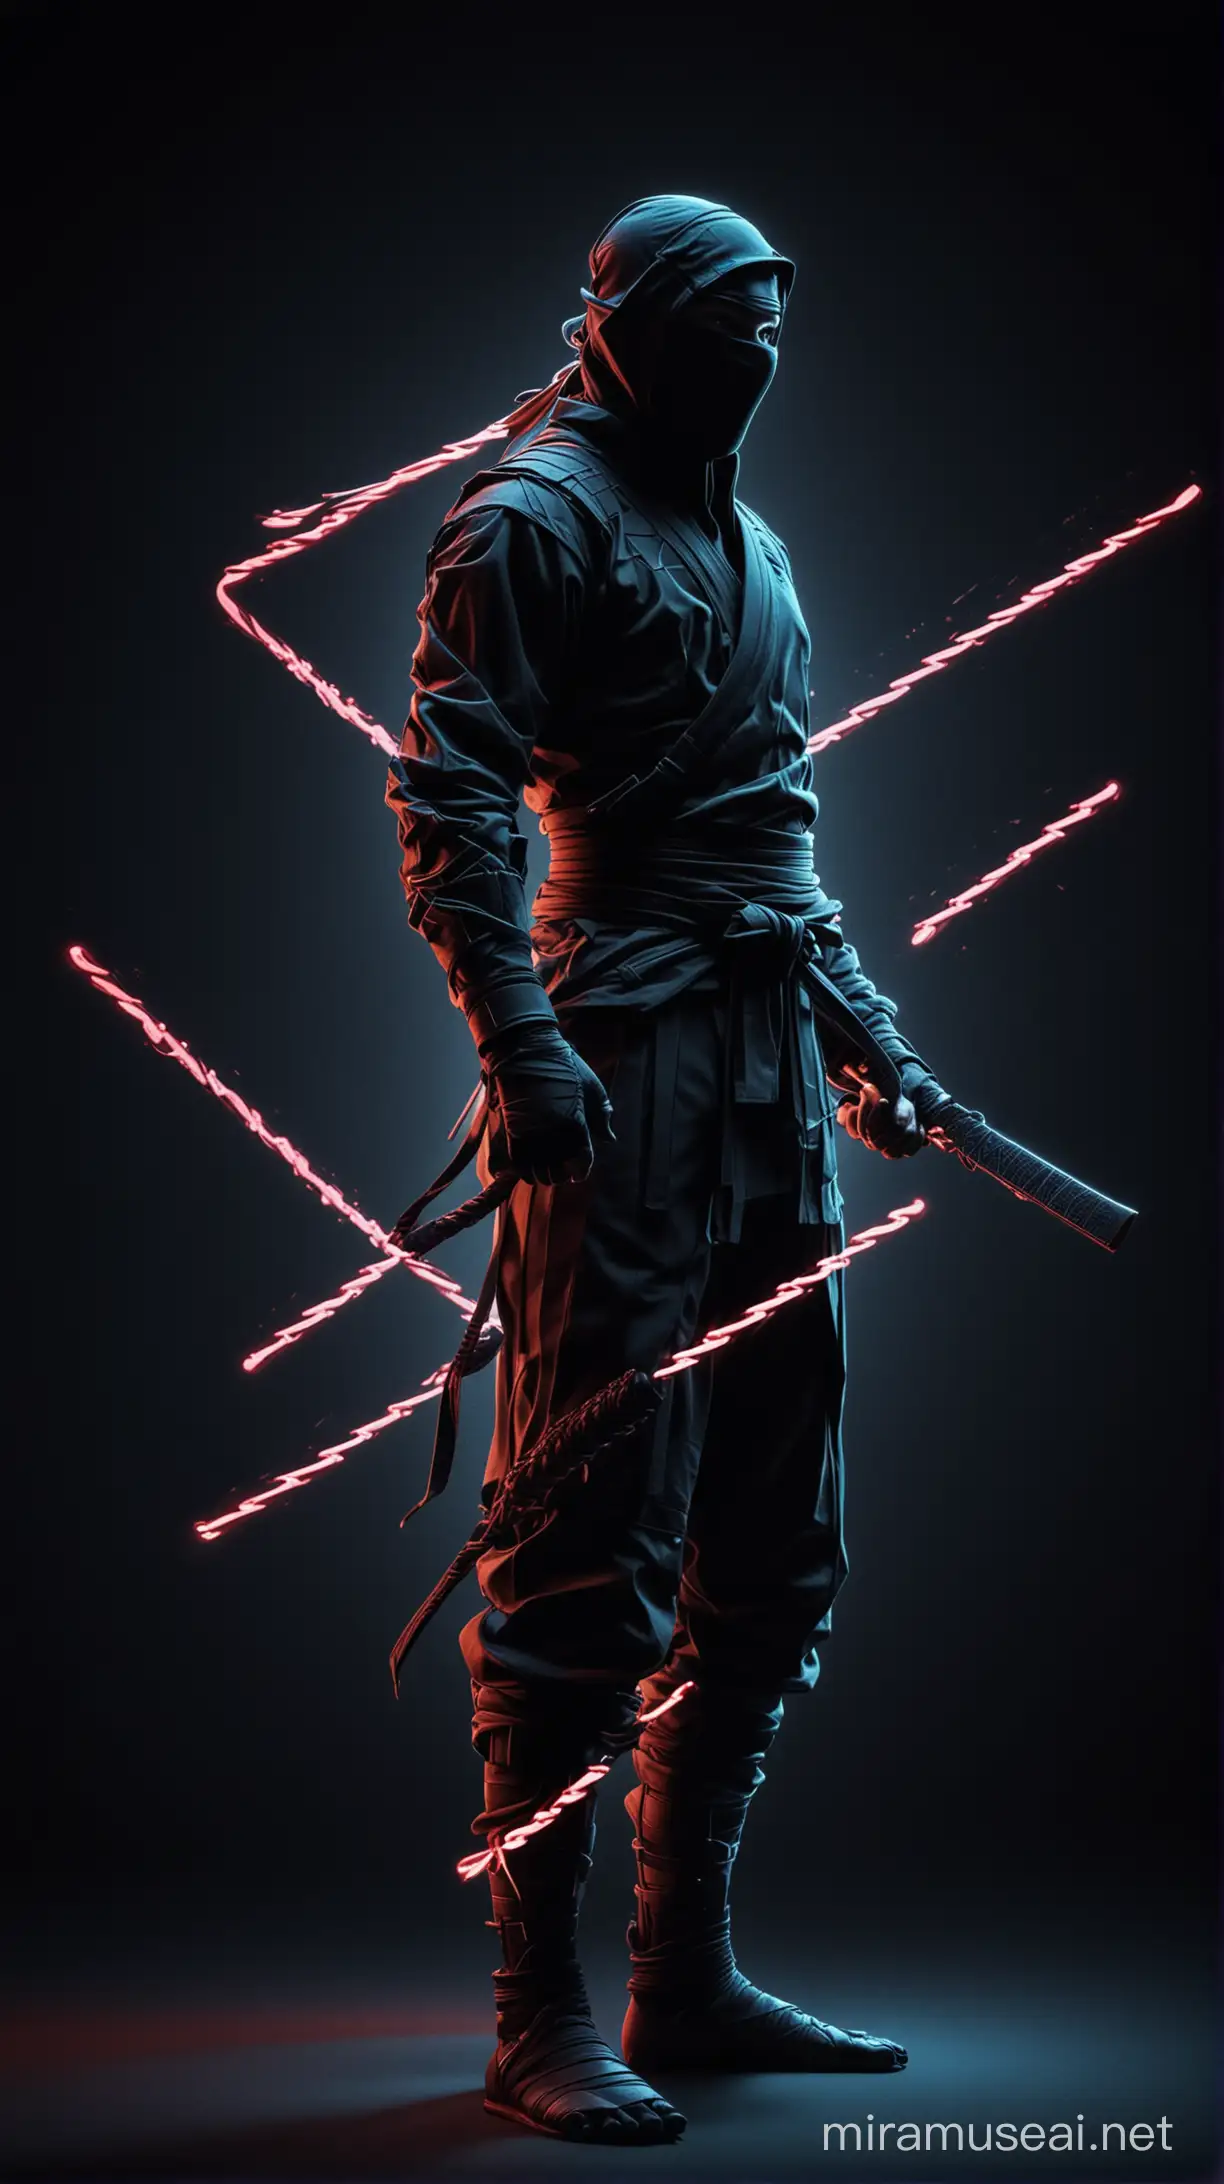 An abstract composition of neon lines and shapes on a dark background, forming the subtle outline of a ninja in a meditative pose. The design plays with light and shadow, creating a sense of mystery and inner strength.